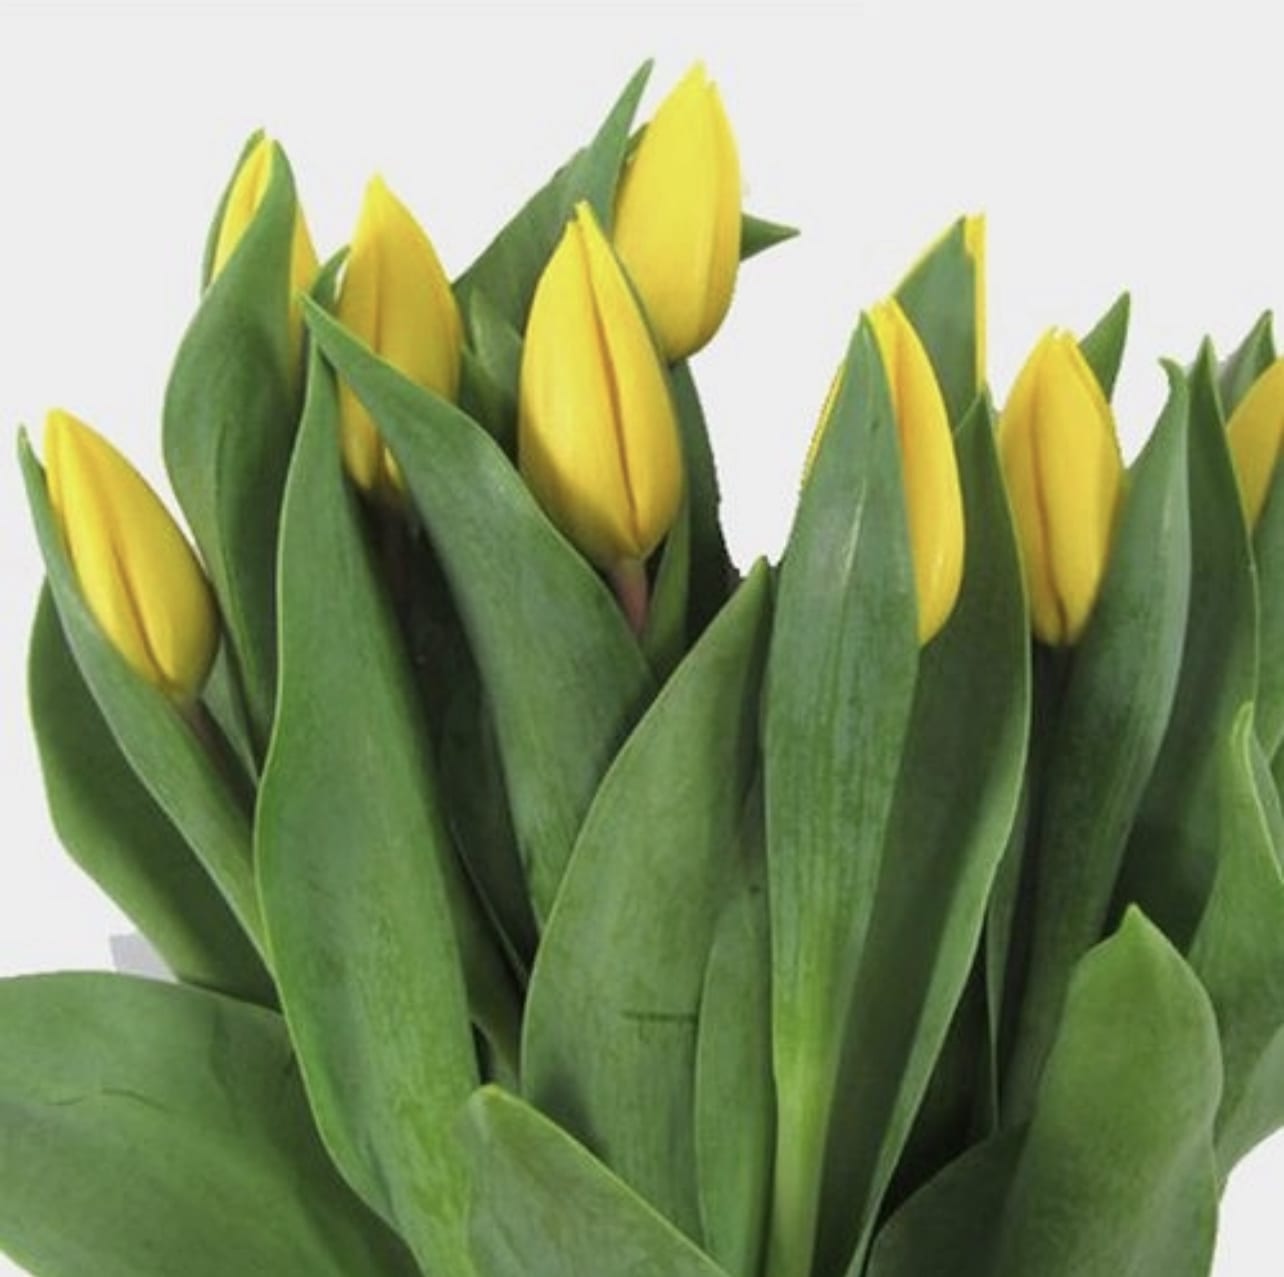 Yellow Tulips - Tulips contains 10 stems per bunch Please read the following instructions before placing your order.  Bulk flower orders placed through our online site must be placed two days in advance from the desire pick up date, that will give us enough time to get it ready for you in case we do not have the item available in store. To check availability of the item you could contact our location in Tustin for more information. If you place the order with no anticipation time your order must be canceled.  155 W. First St. Tustin, CA. 92780 (714) 368-9845  Mon-Fri 8 a.m. - 6 p.m. Saturday 8 a.m - 5 p.m. Sunday 10 a.m. - 2 p.m.